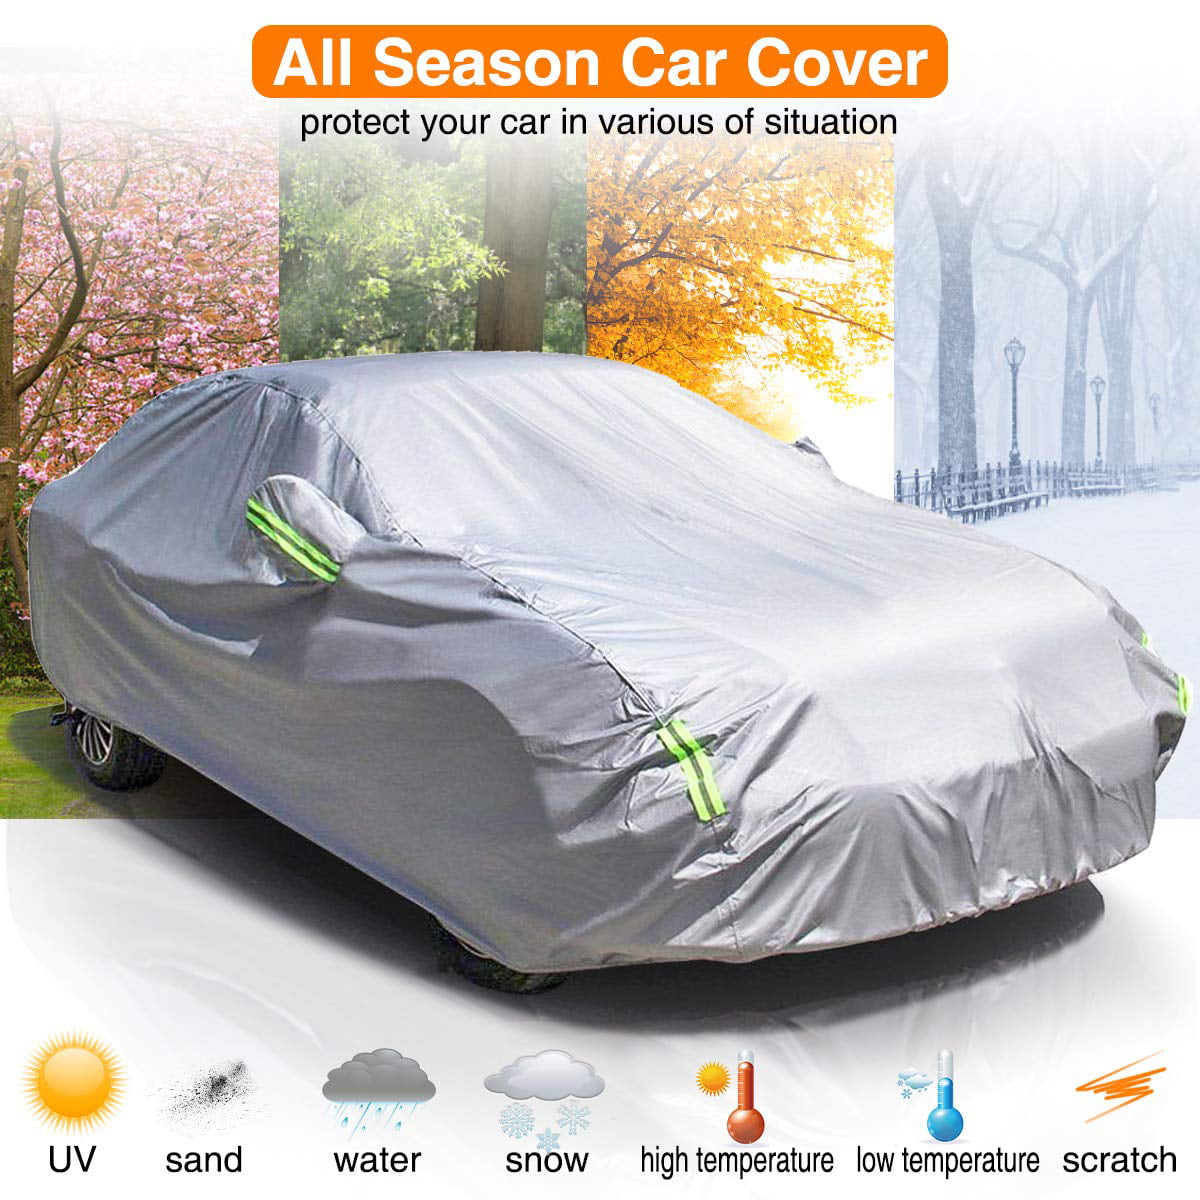 z-snowman Car Cover Waterproof All Weather for Automobiles 1927059 inches Universal Fit for Sedan 